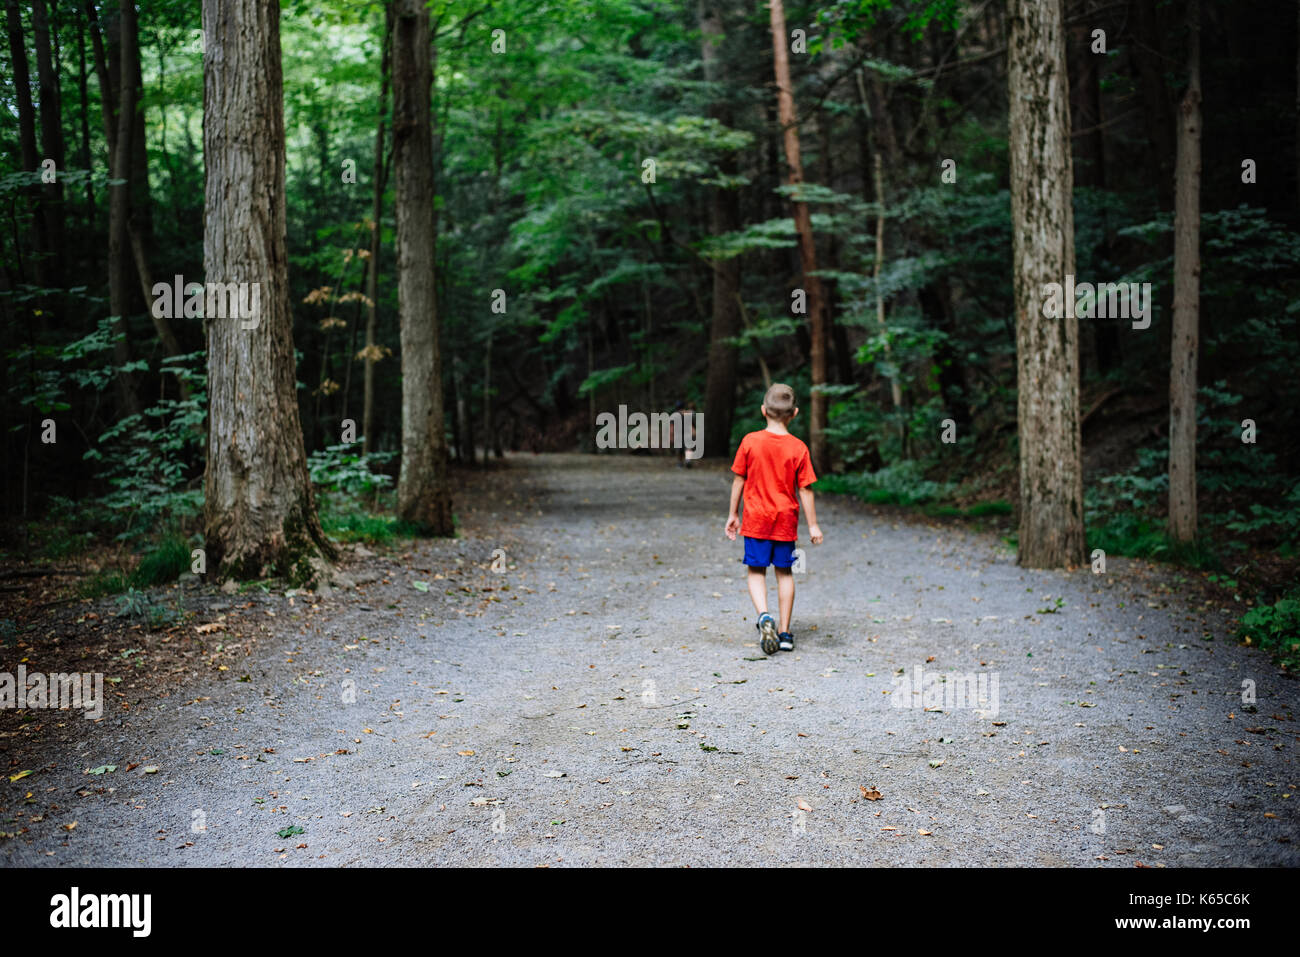 A boy walks on a dirt path in the woods. Stock Photo